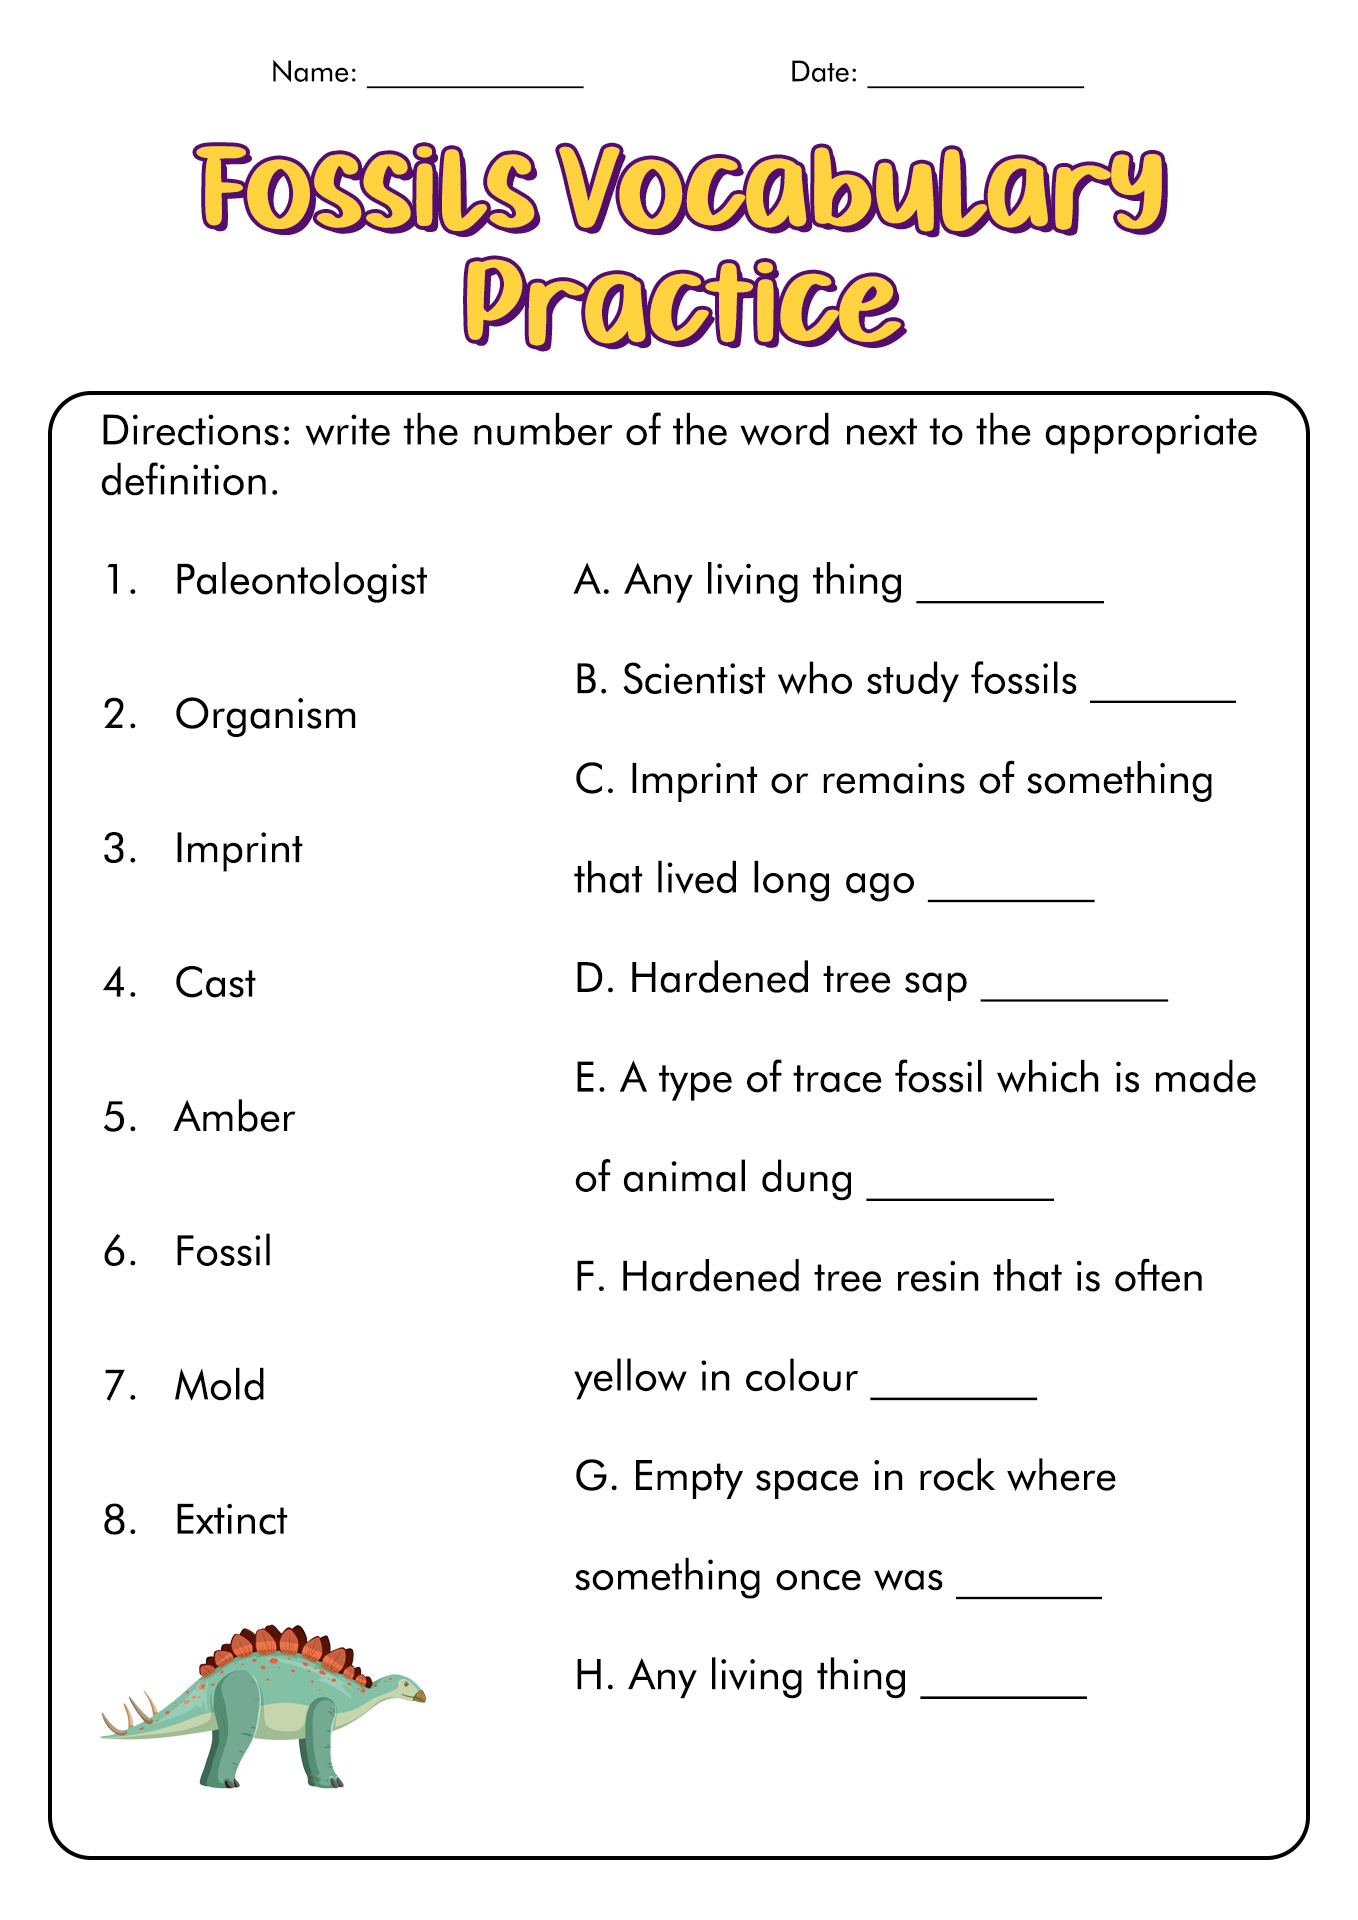 11 Best Images of Fossils Activities Worksheets Fossil Activity